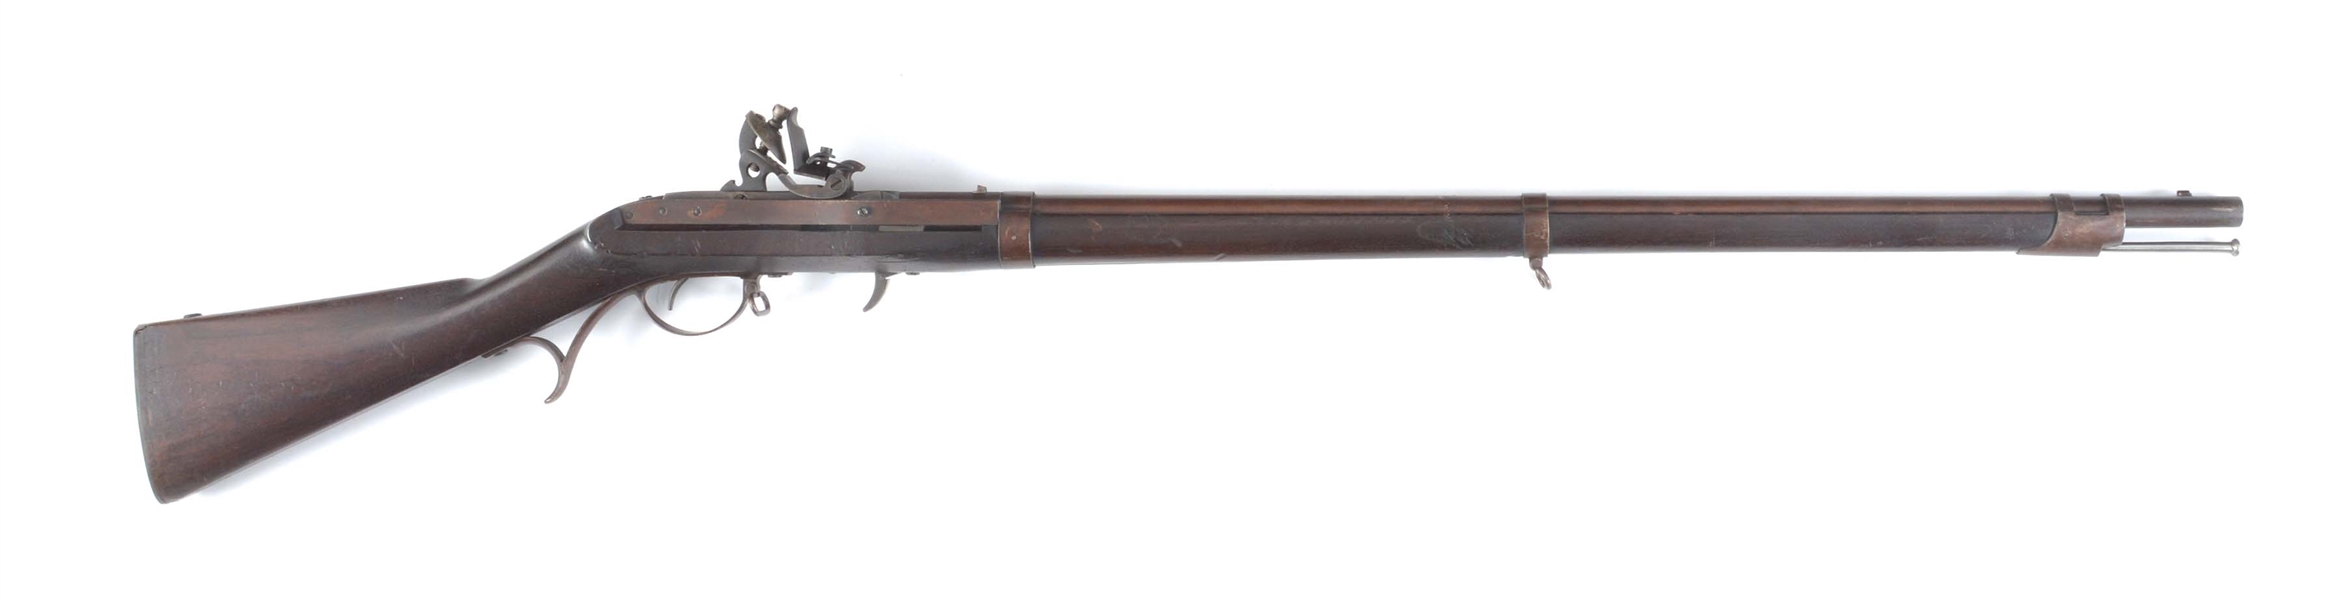 (A) VERY FINE MODEL 1819 HARPERS FERRY HALL FLINT MUSKET, DATED 1837.